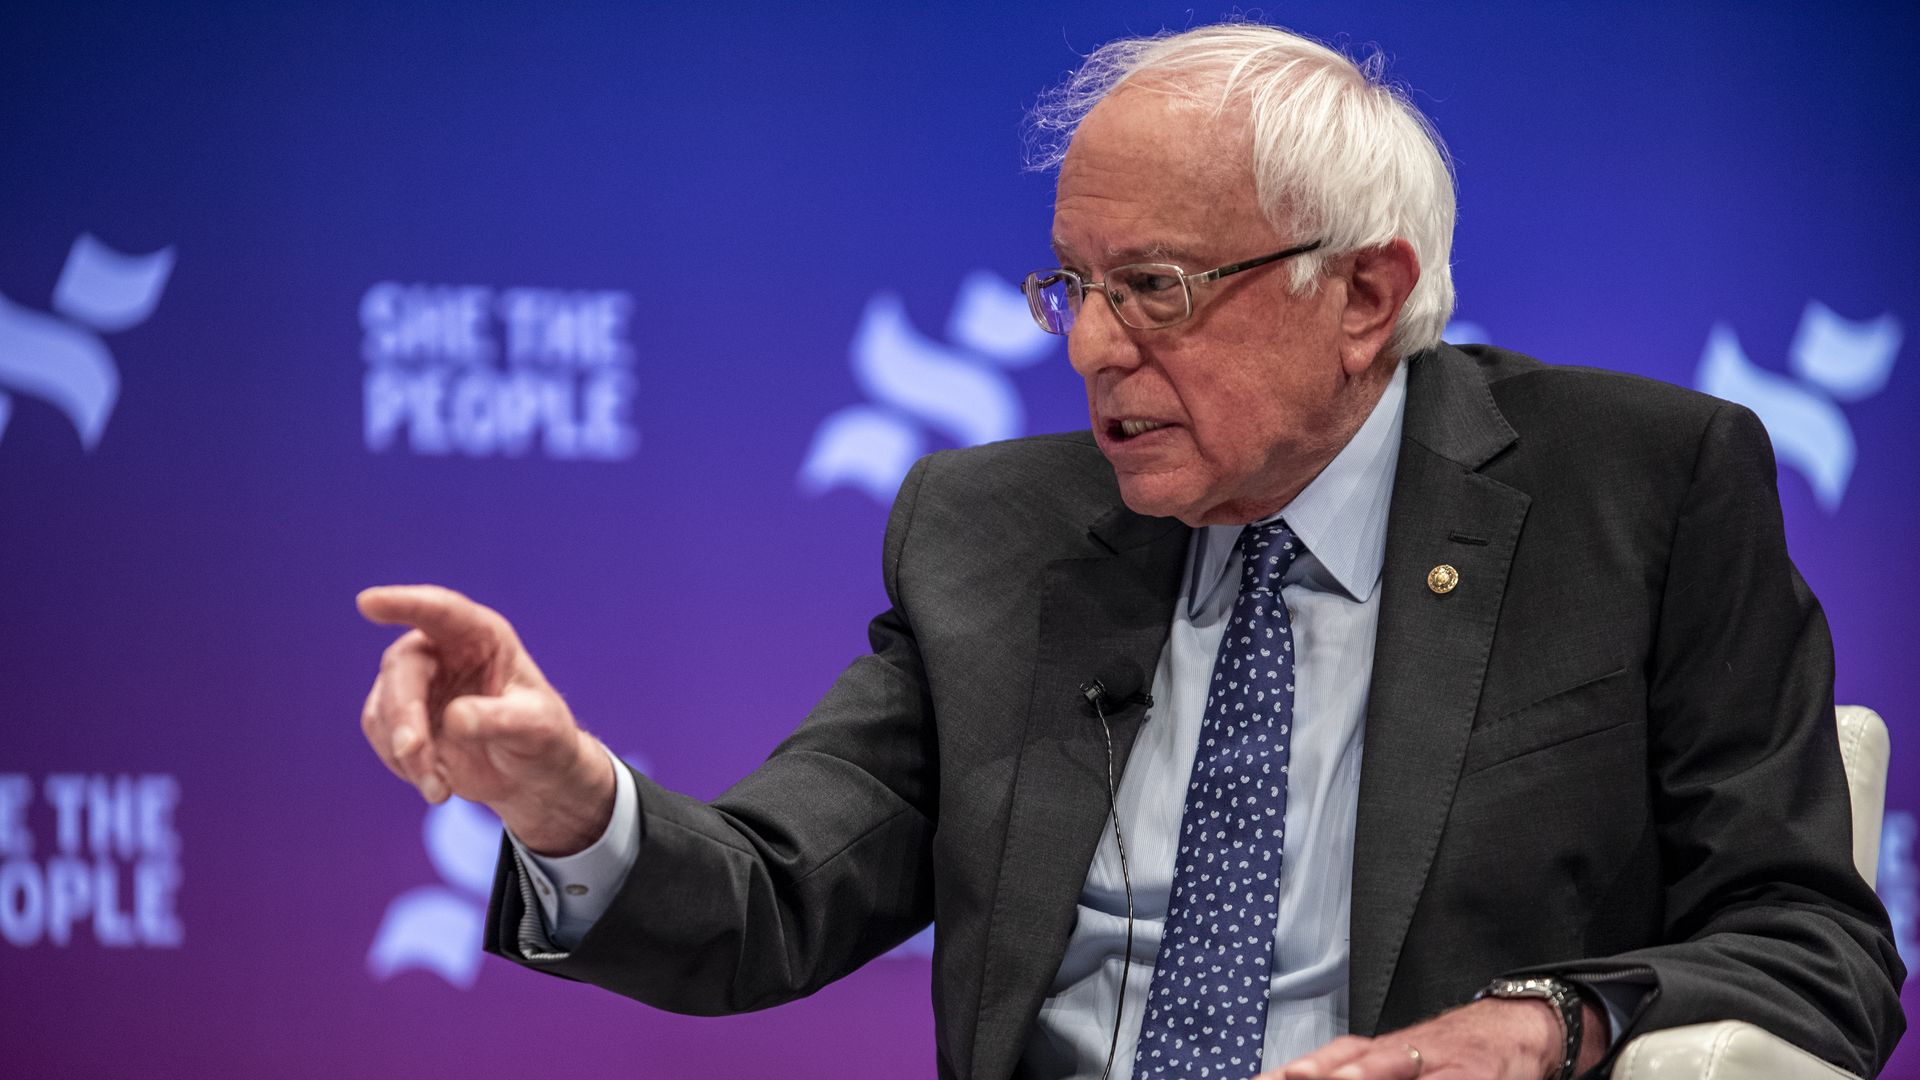 In this image, Bernie Sanders sits in a chair and talks while pointing a finger at something.